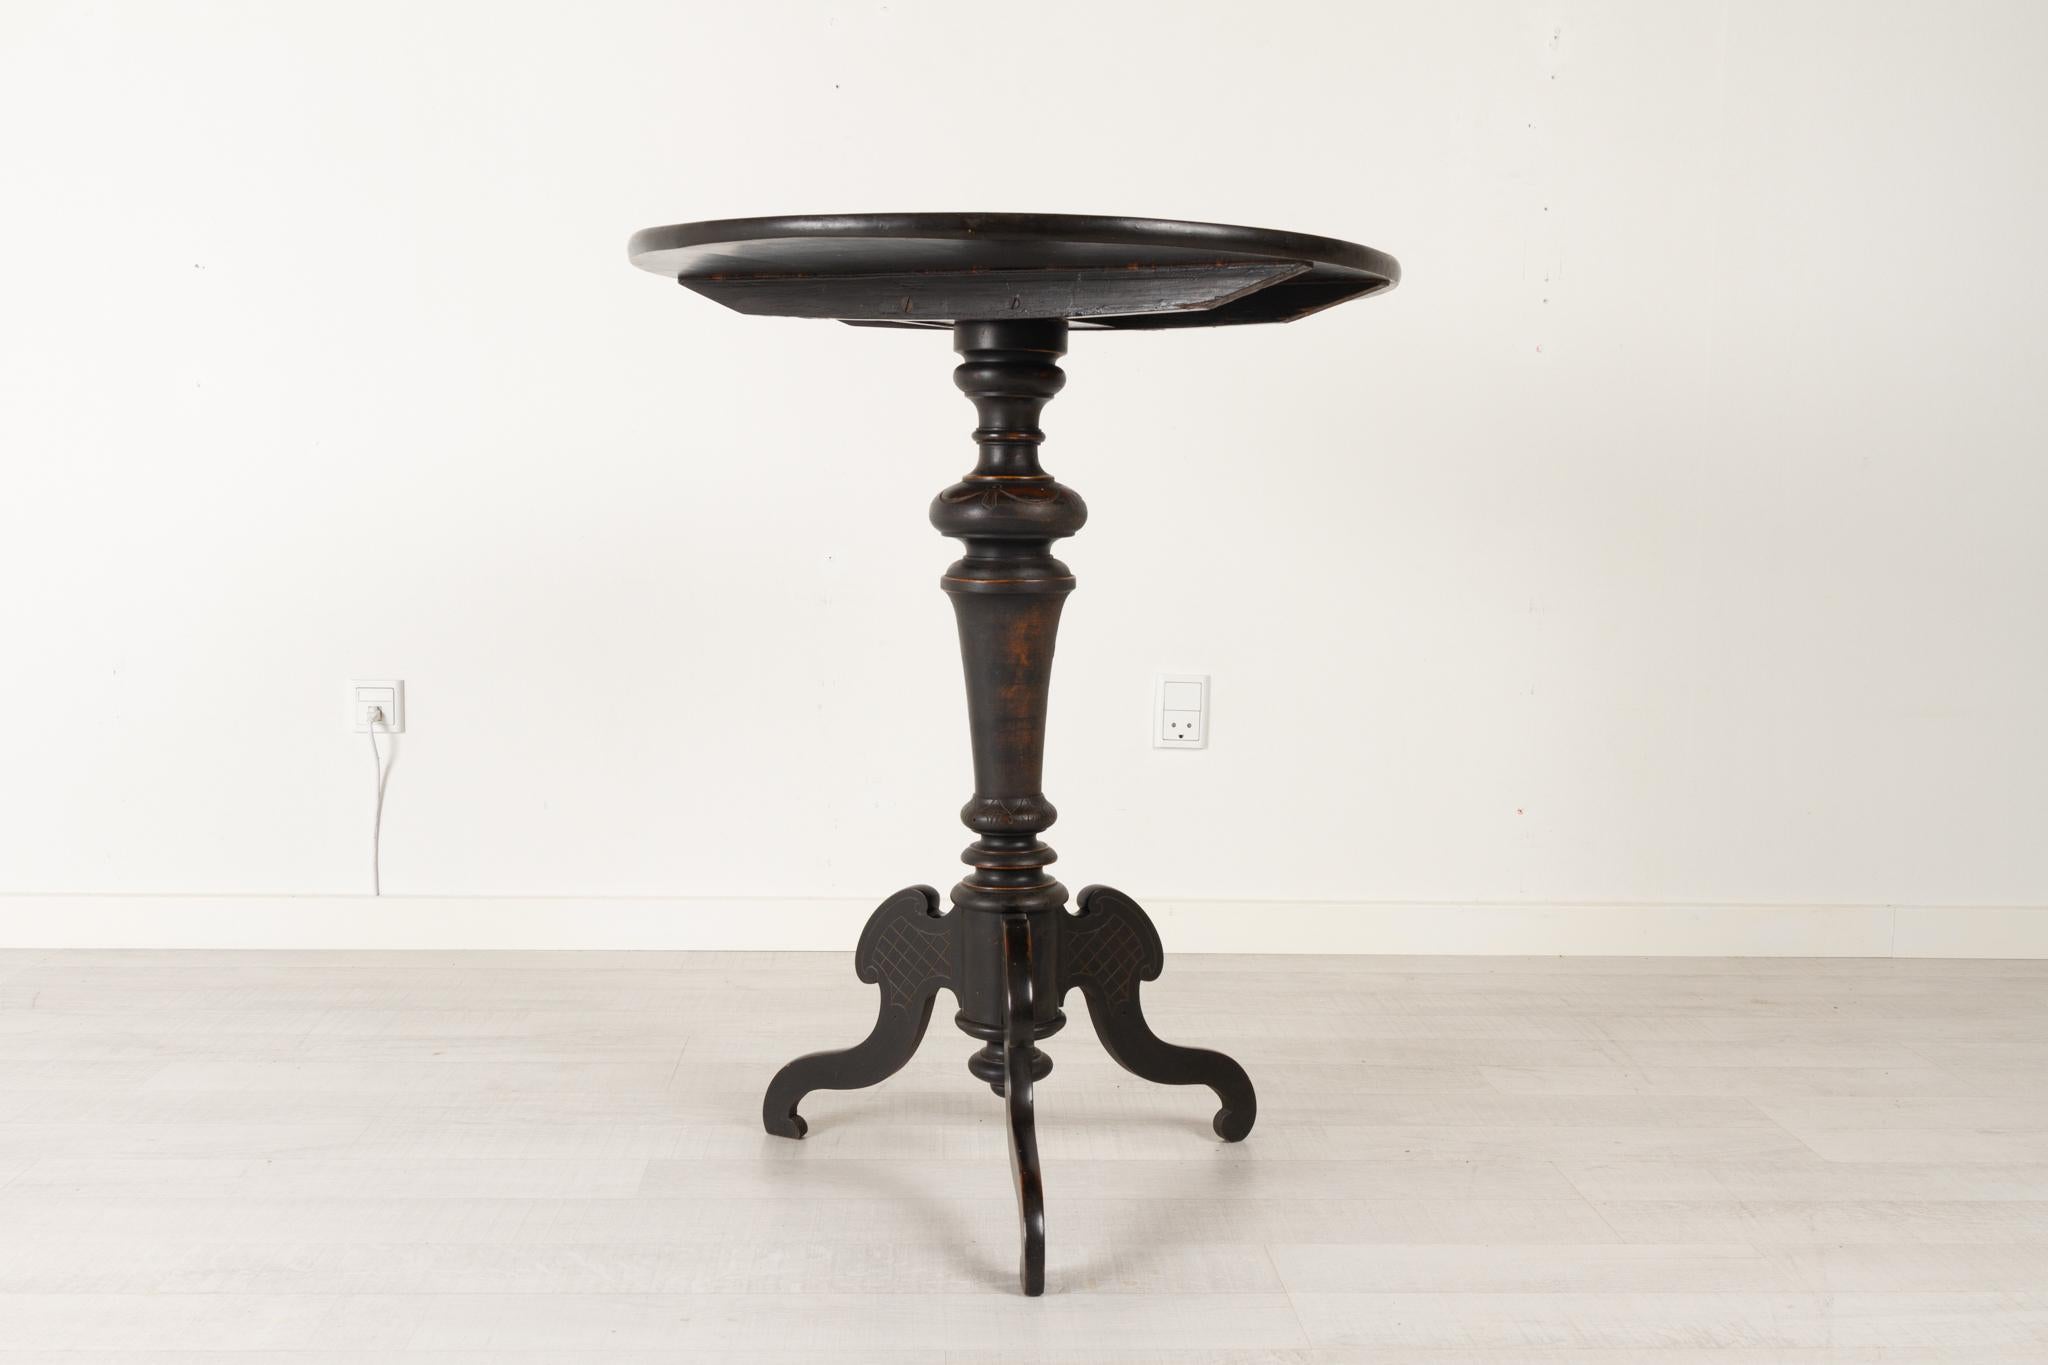 Unknown Antique Ebonized and Laquered Side Table, Late 1800s